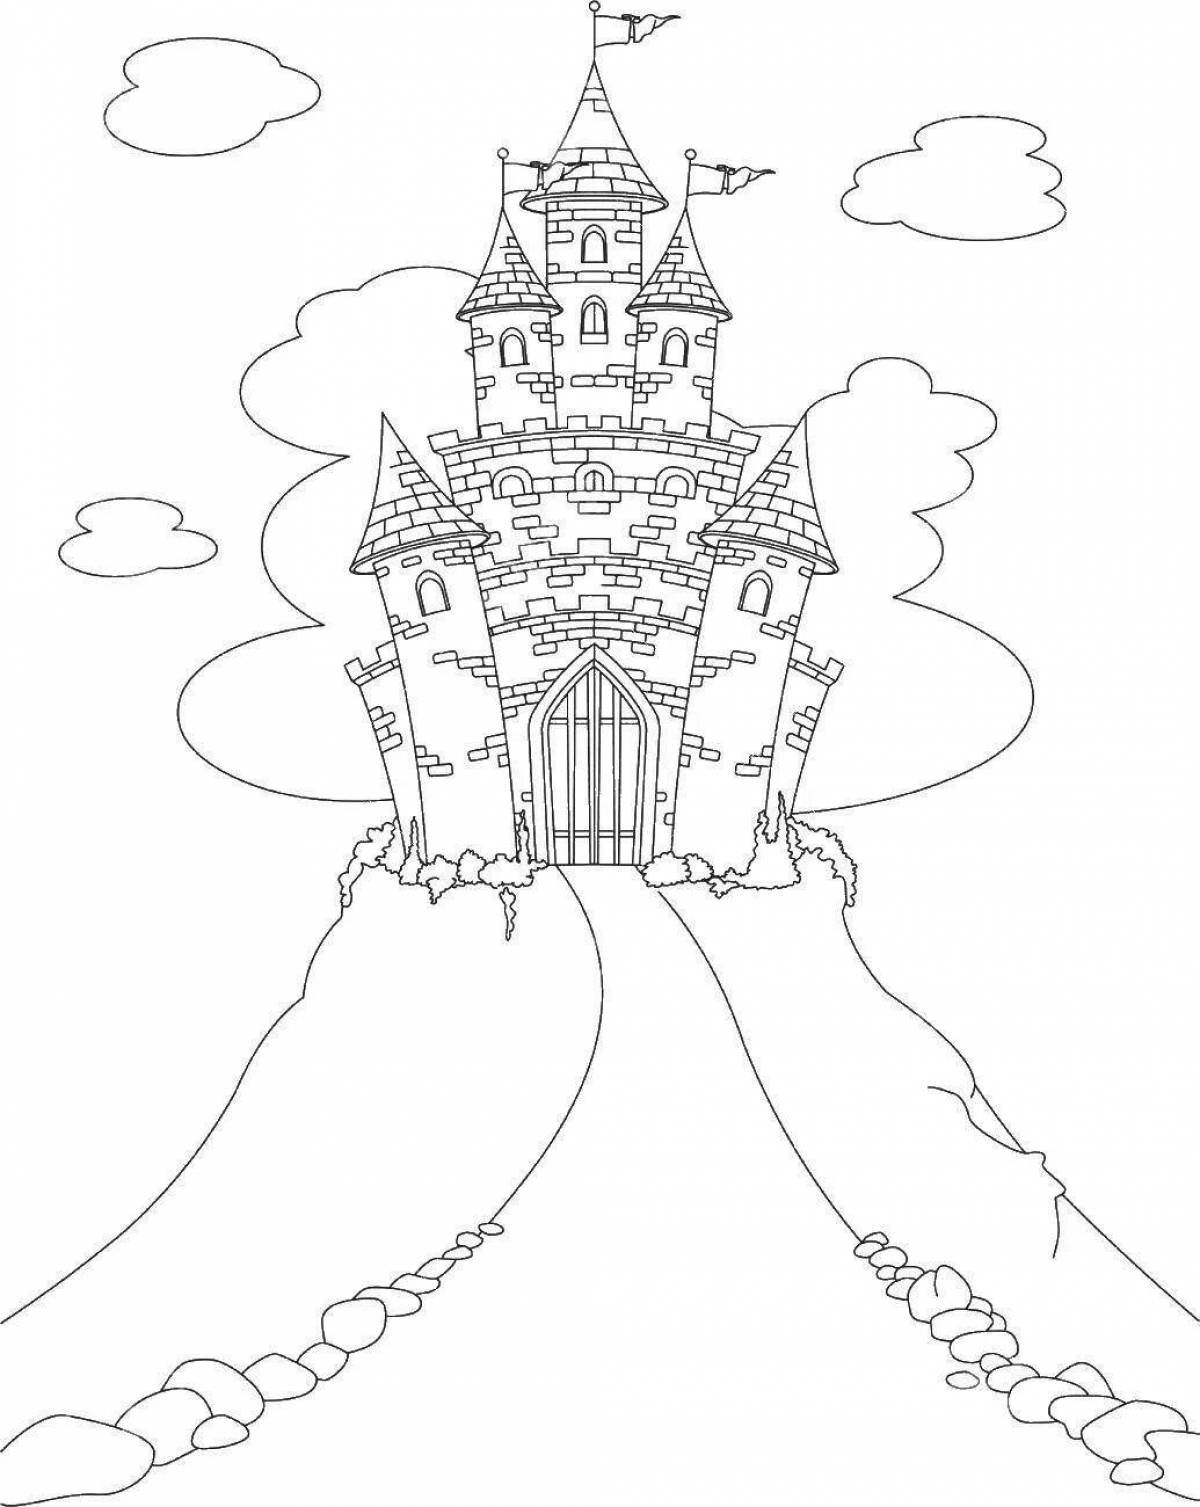 Coloring page of the grandiose palace of the snow queen